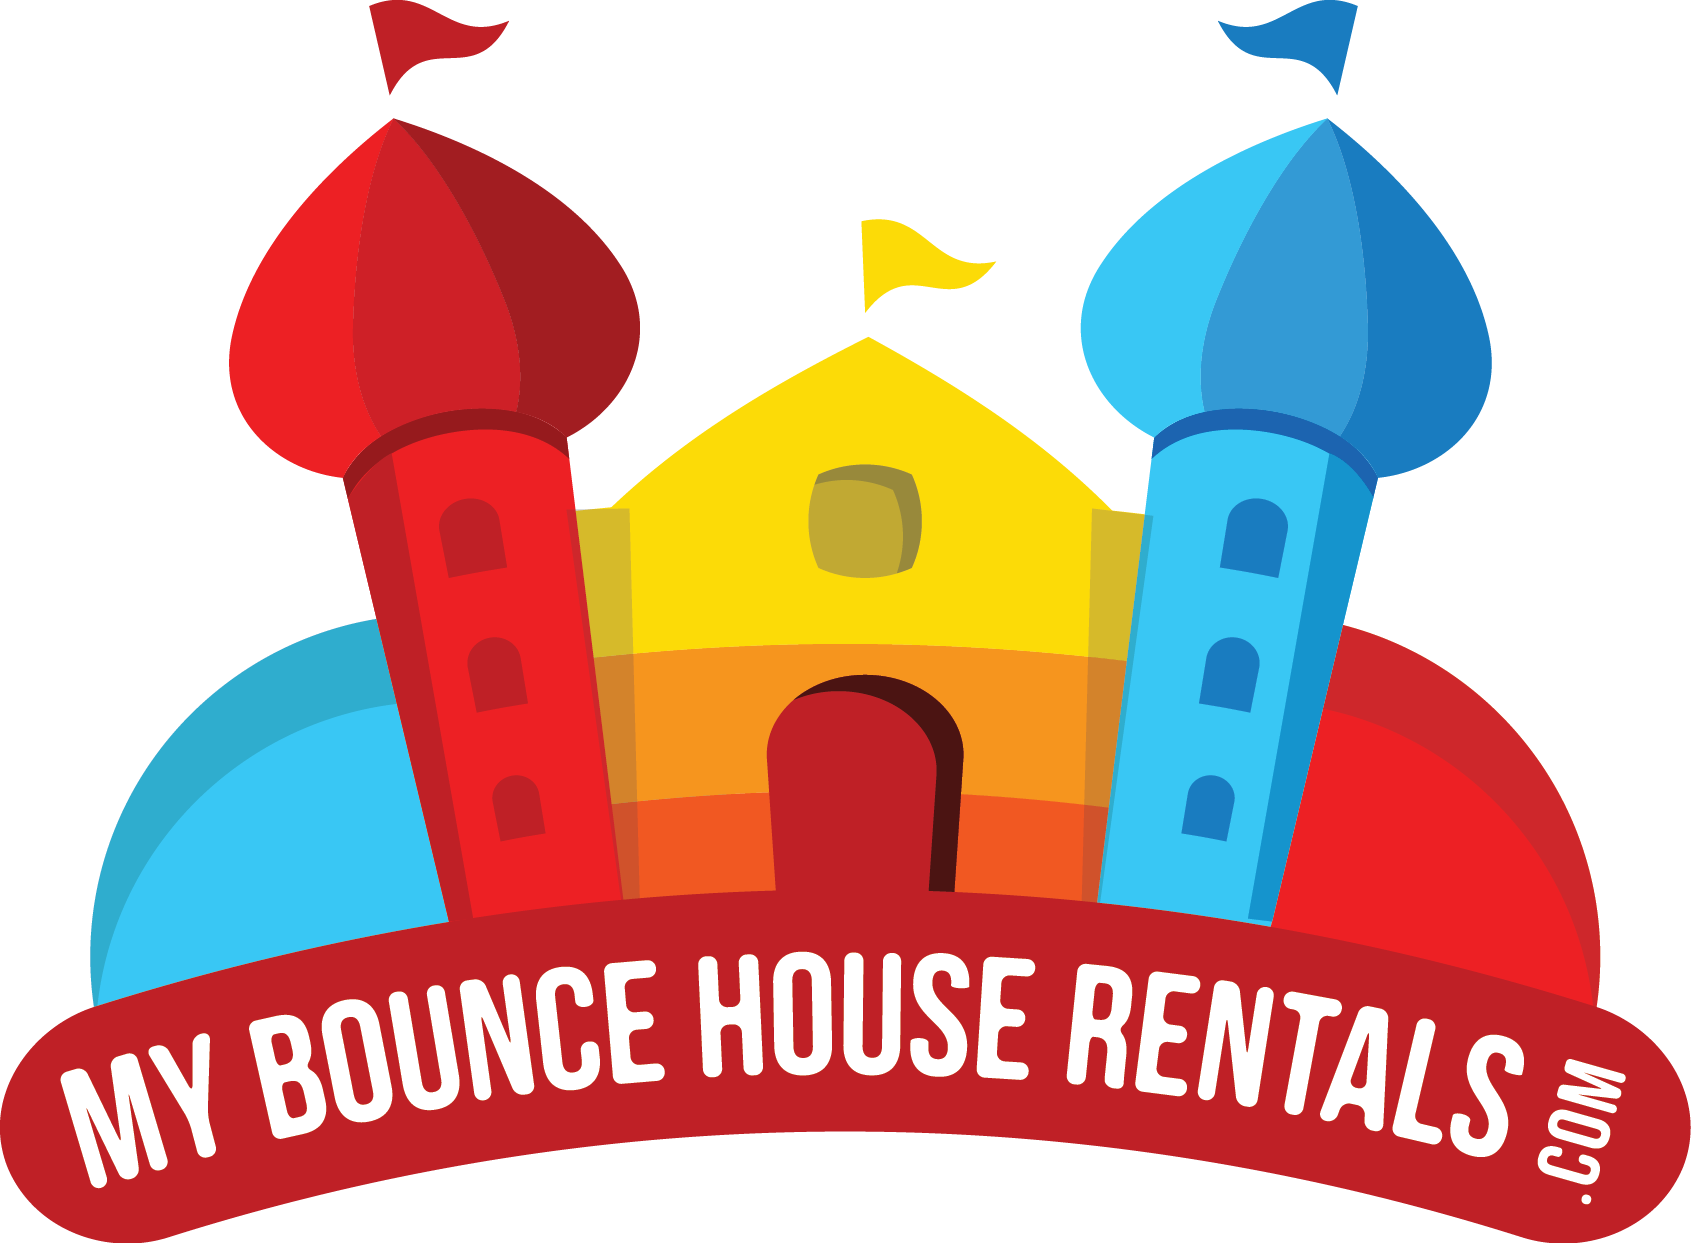 My Bounce House Rentals of Cape Coral's Logo